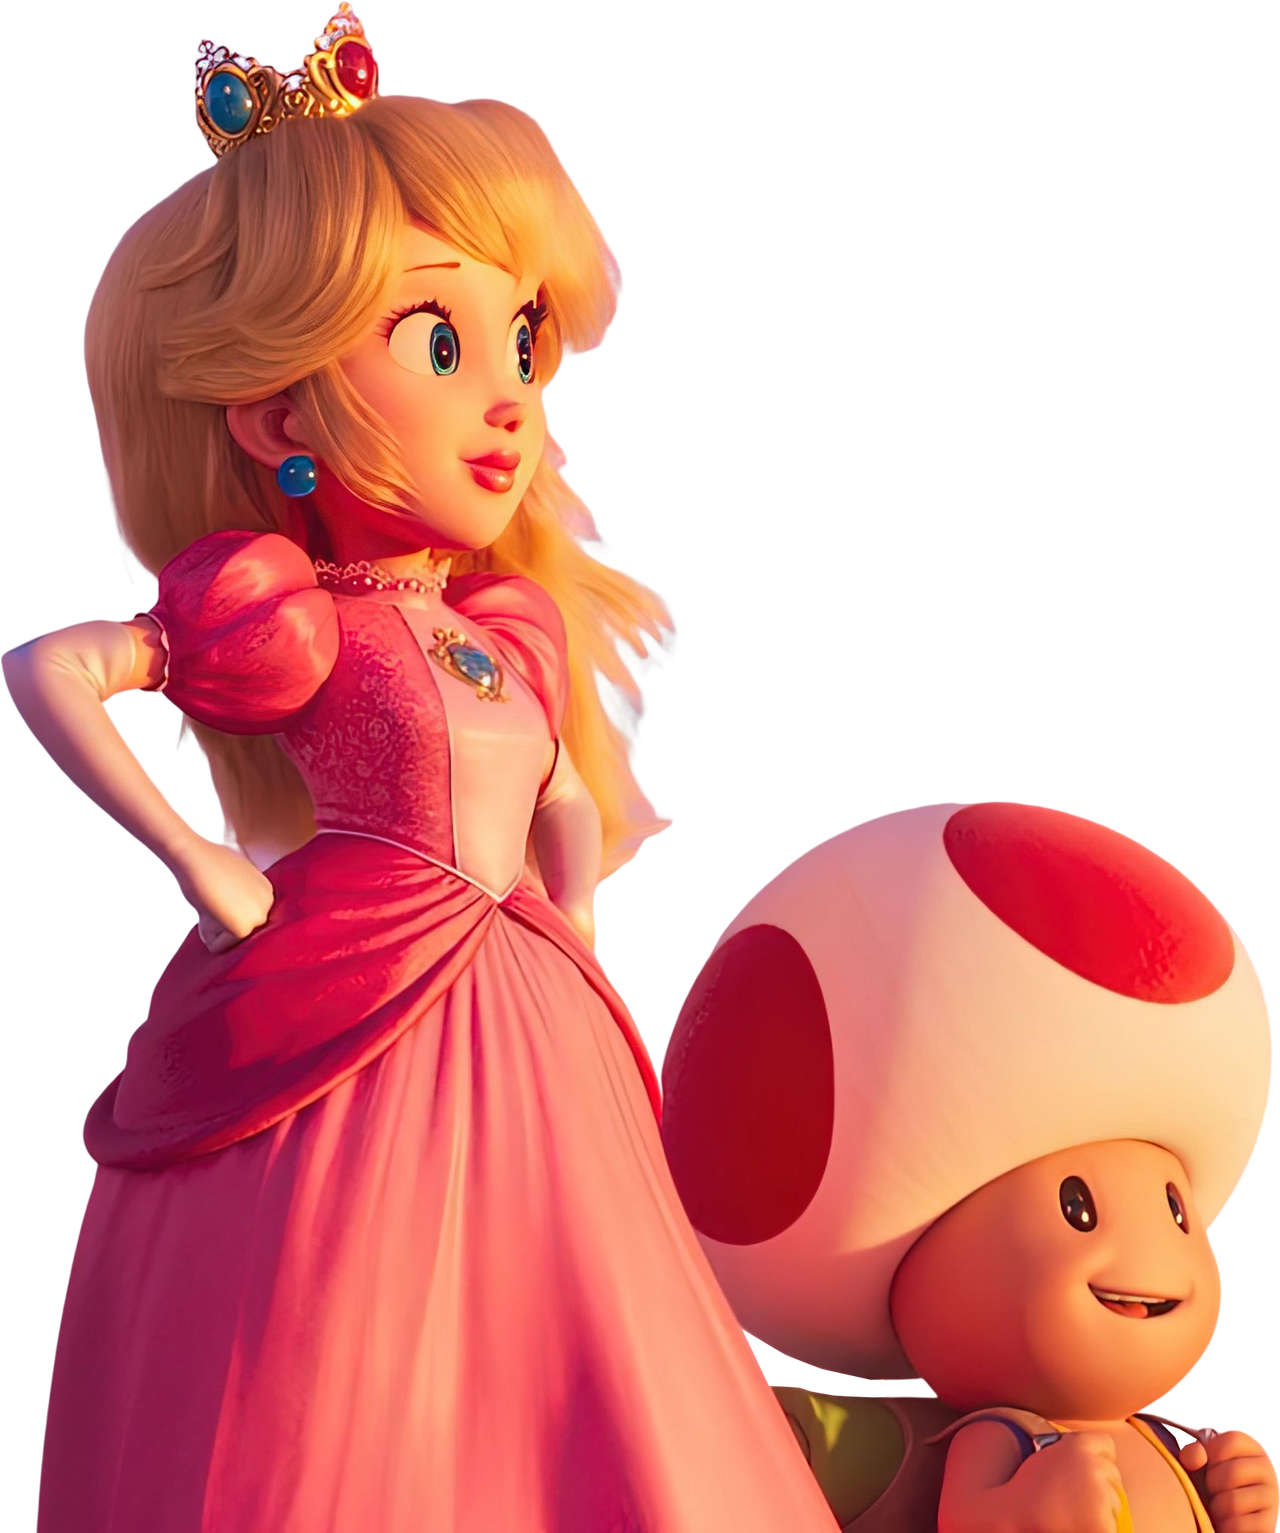 Peaches from the Mario movie